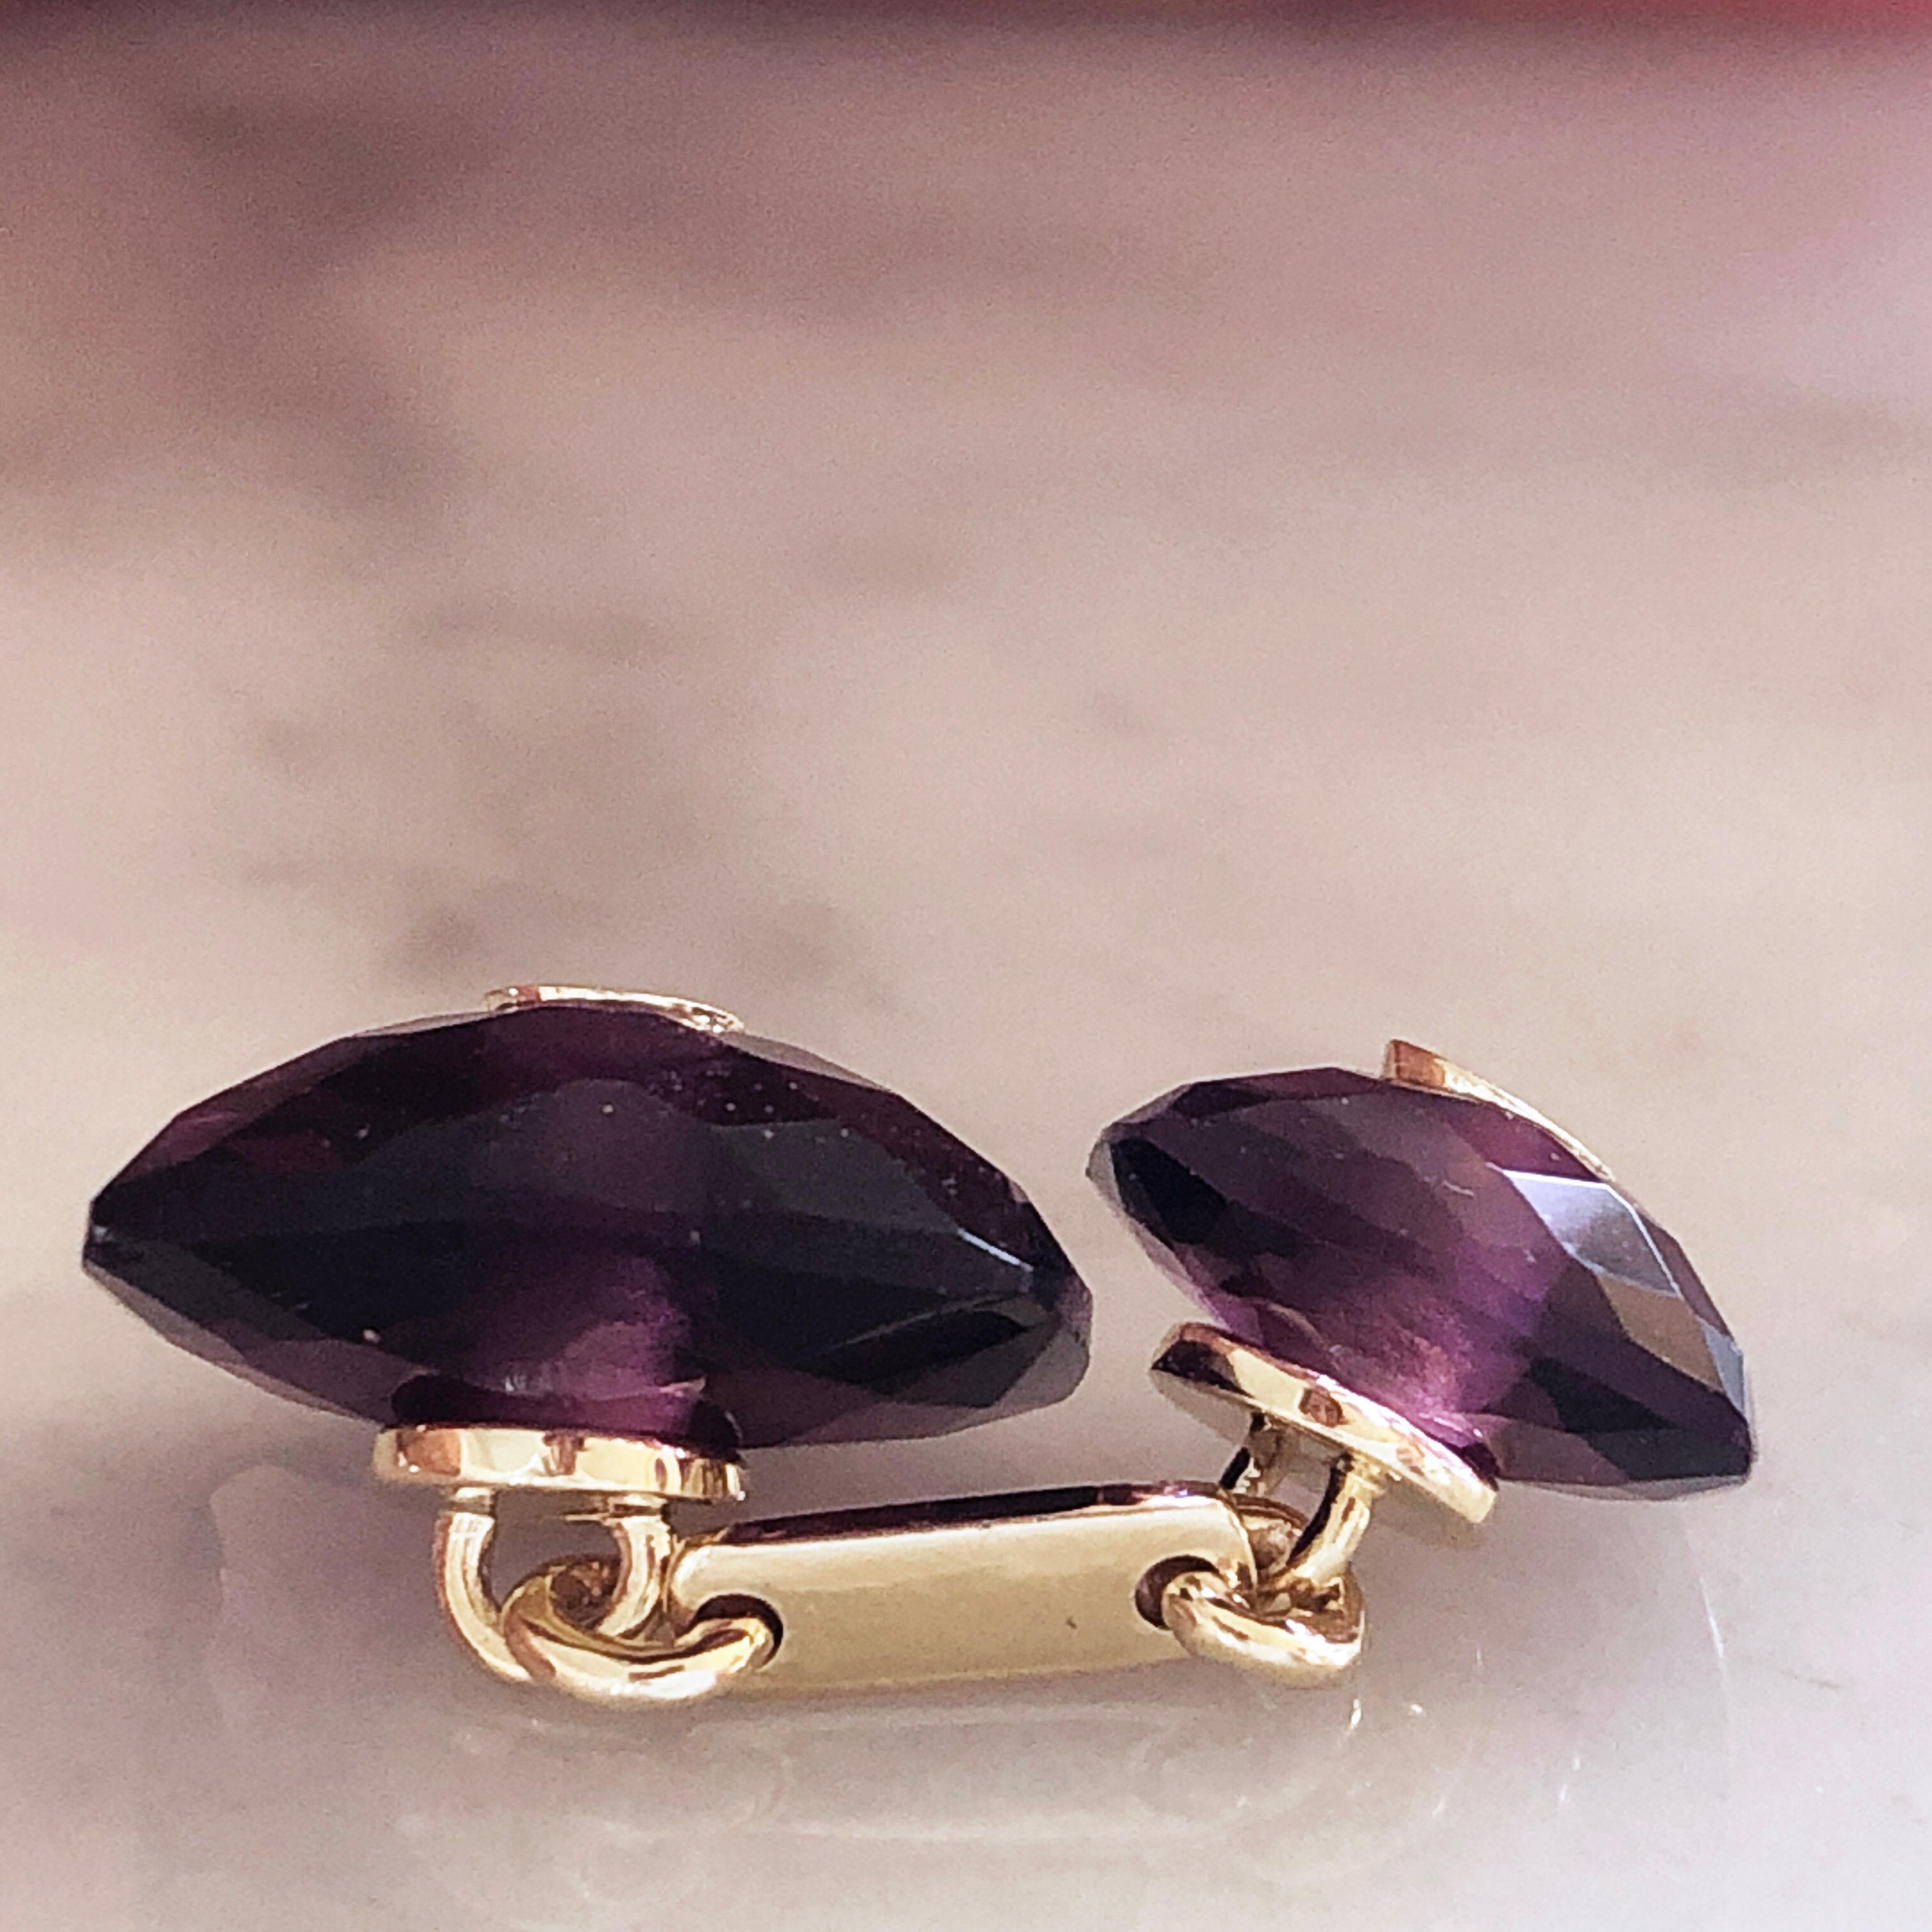 Yellow Sapphire Hand Inlaid Faceted Amethyst Setting Yellow Gold Cufflinks 10